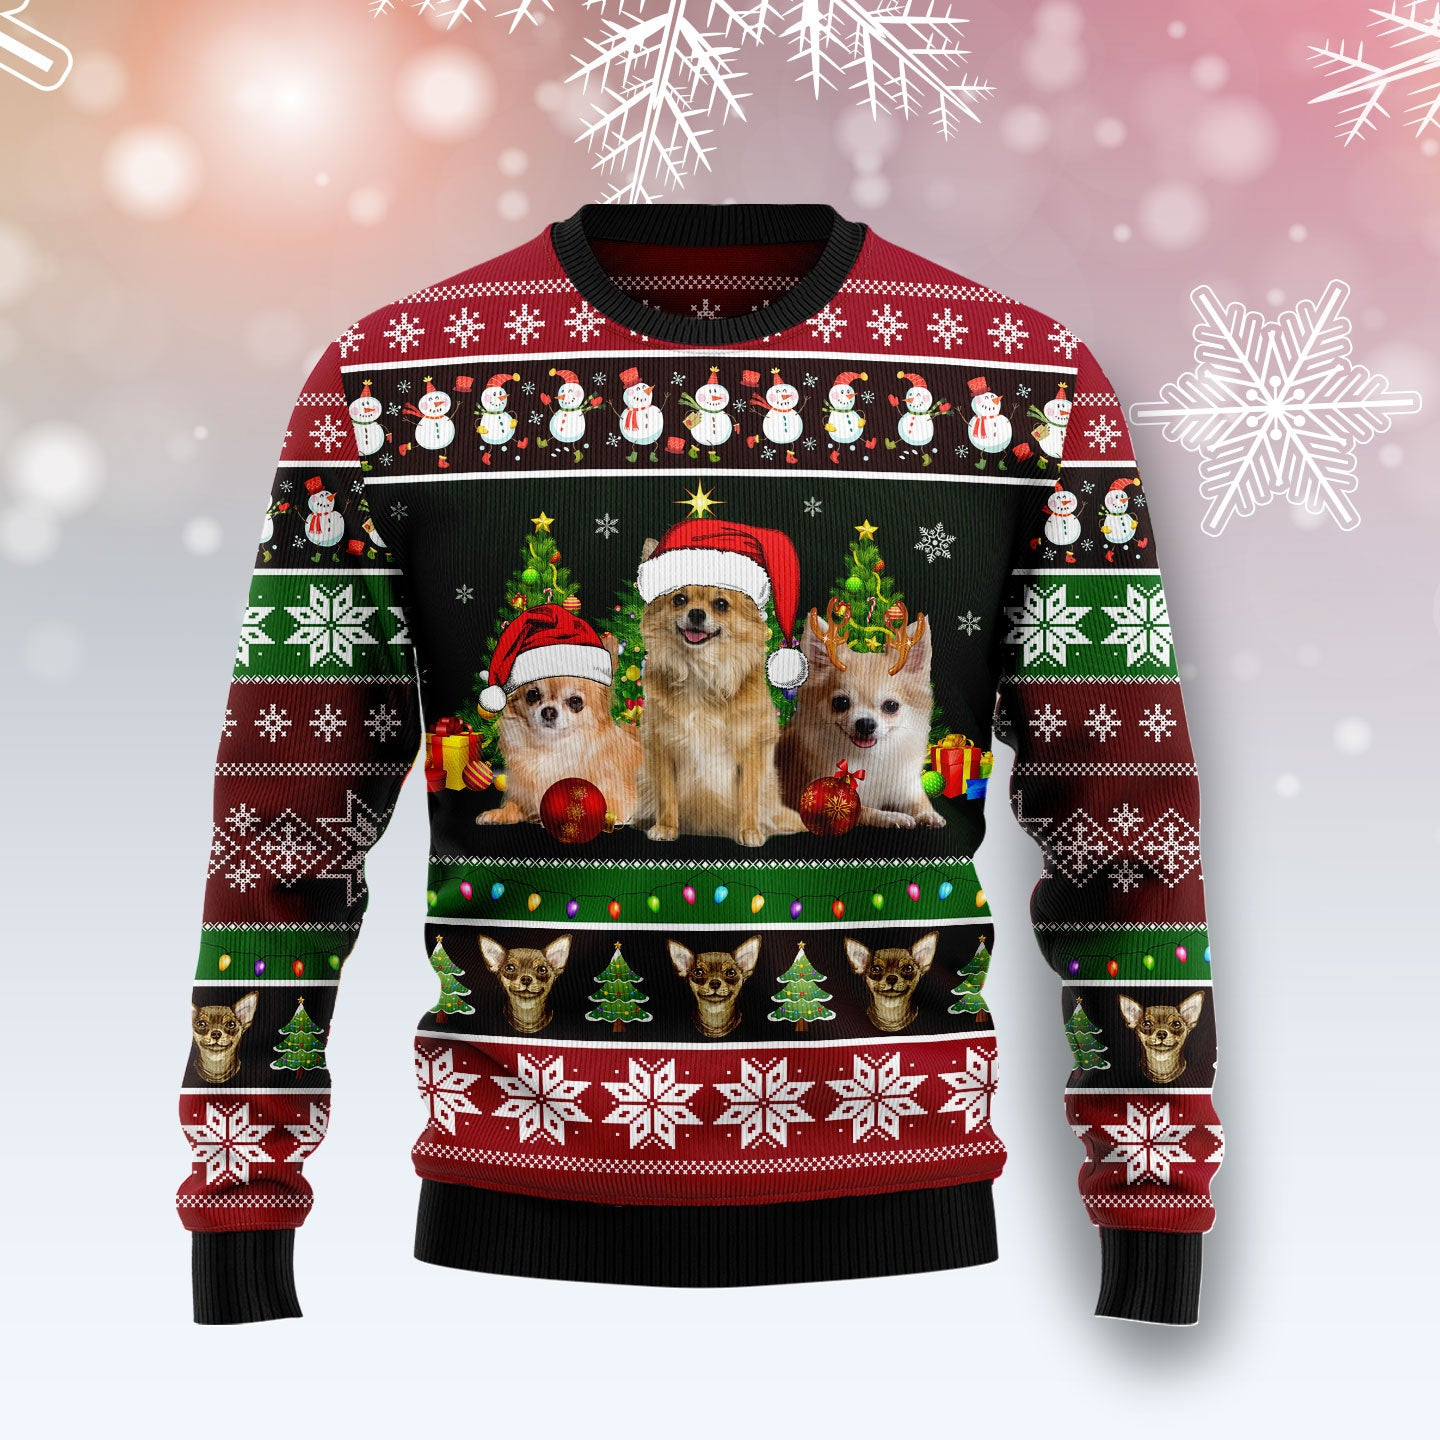 Chihuahua Group Beauty Ugly Christmas Sweater, Ugly Sweater For Men Women, Holiday Sweater